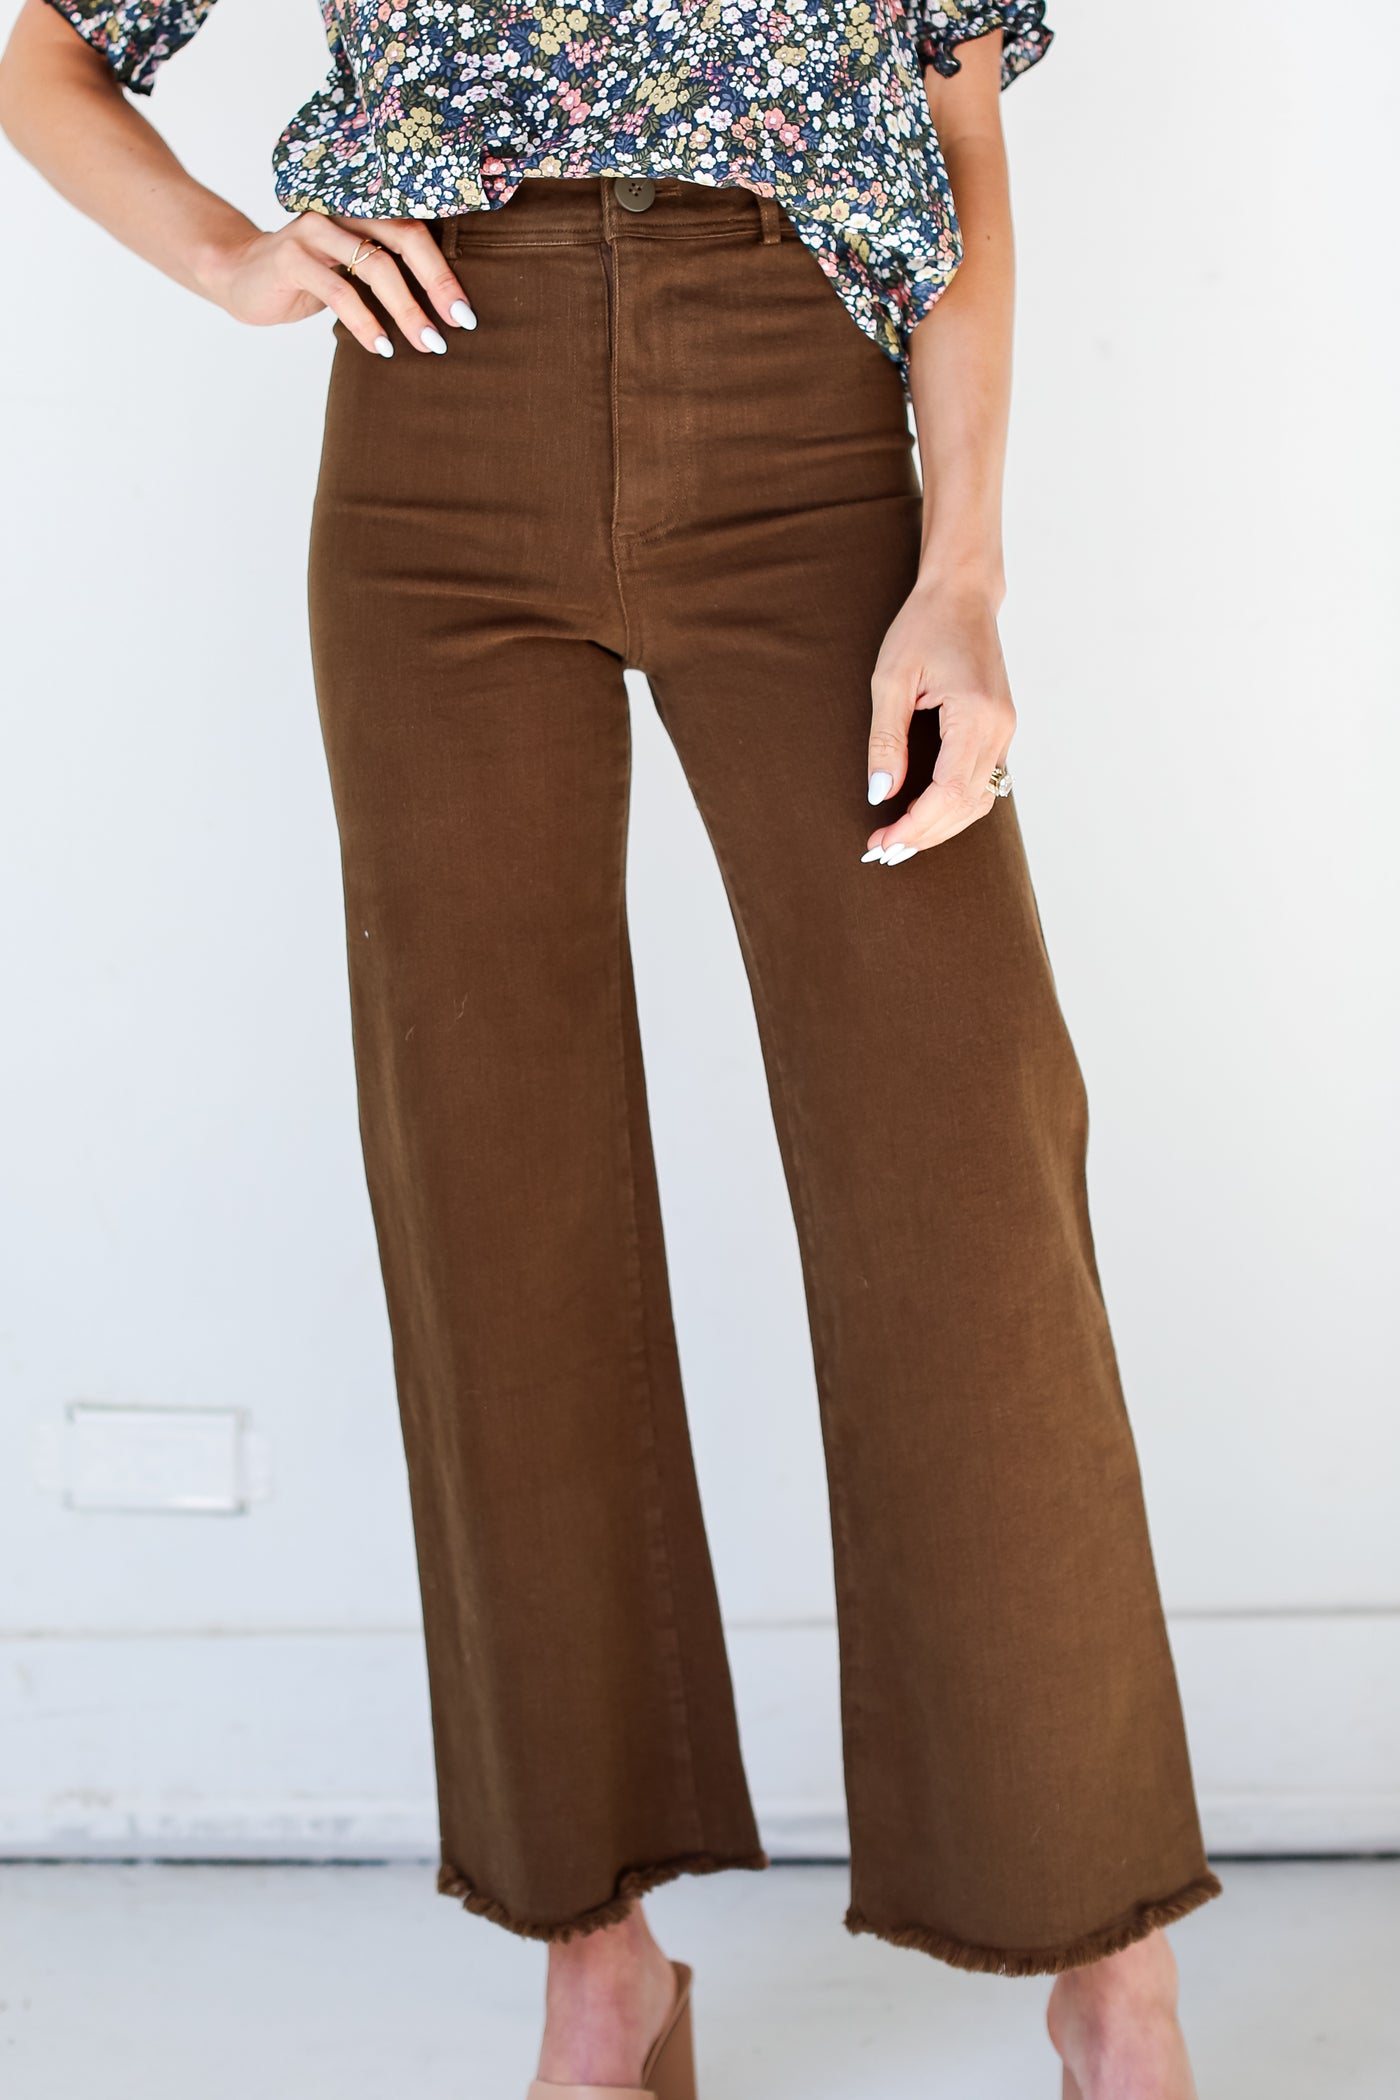 brown Wide Leg Jeans close up